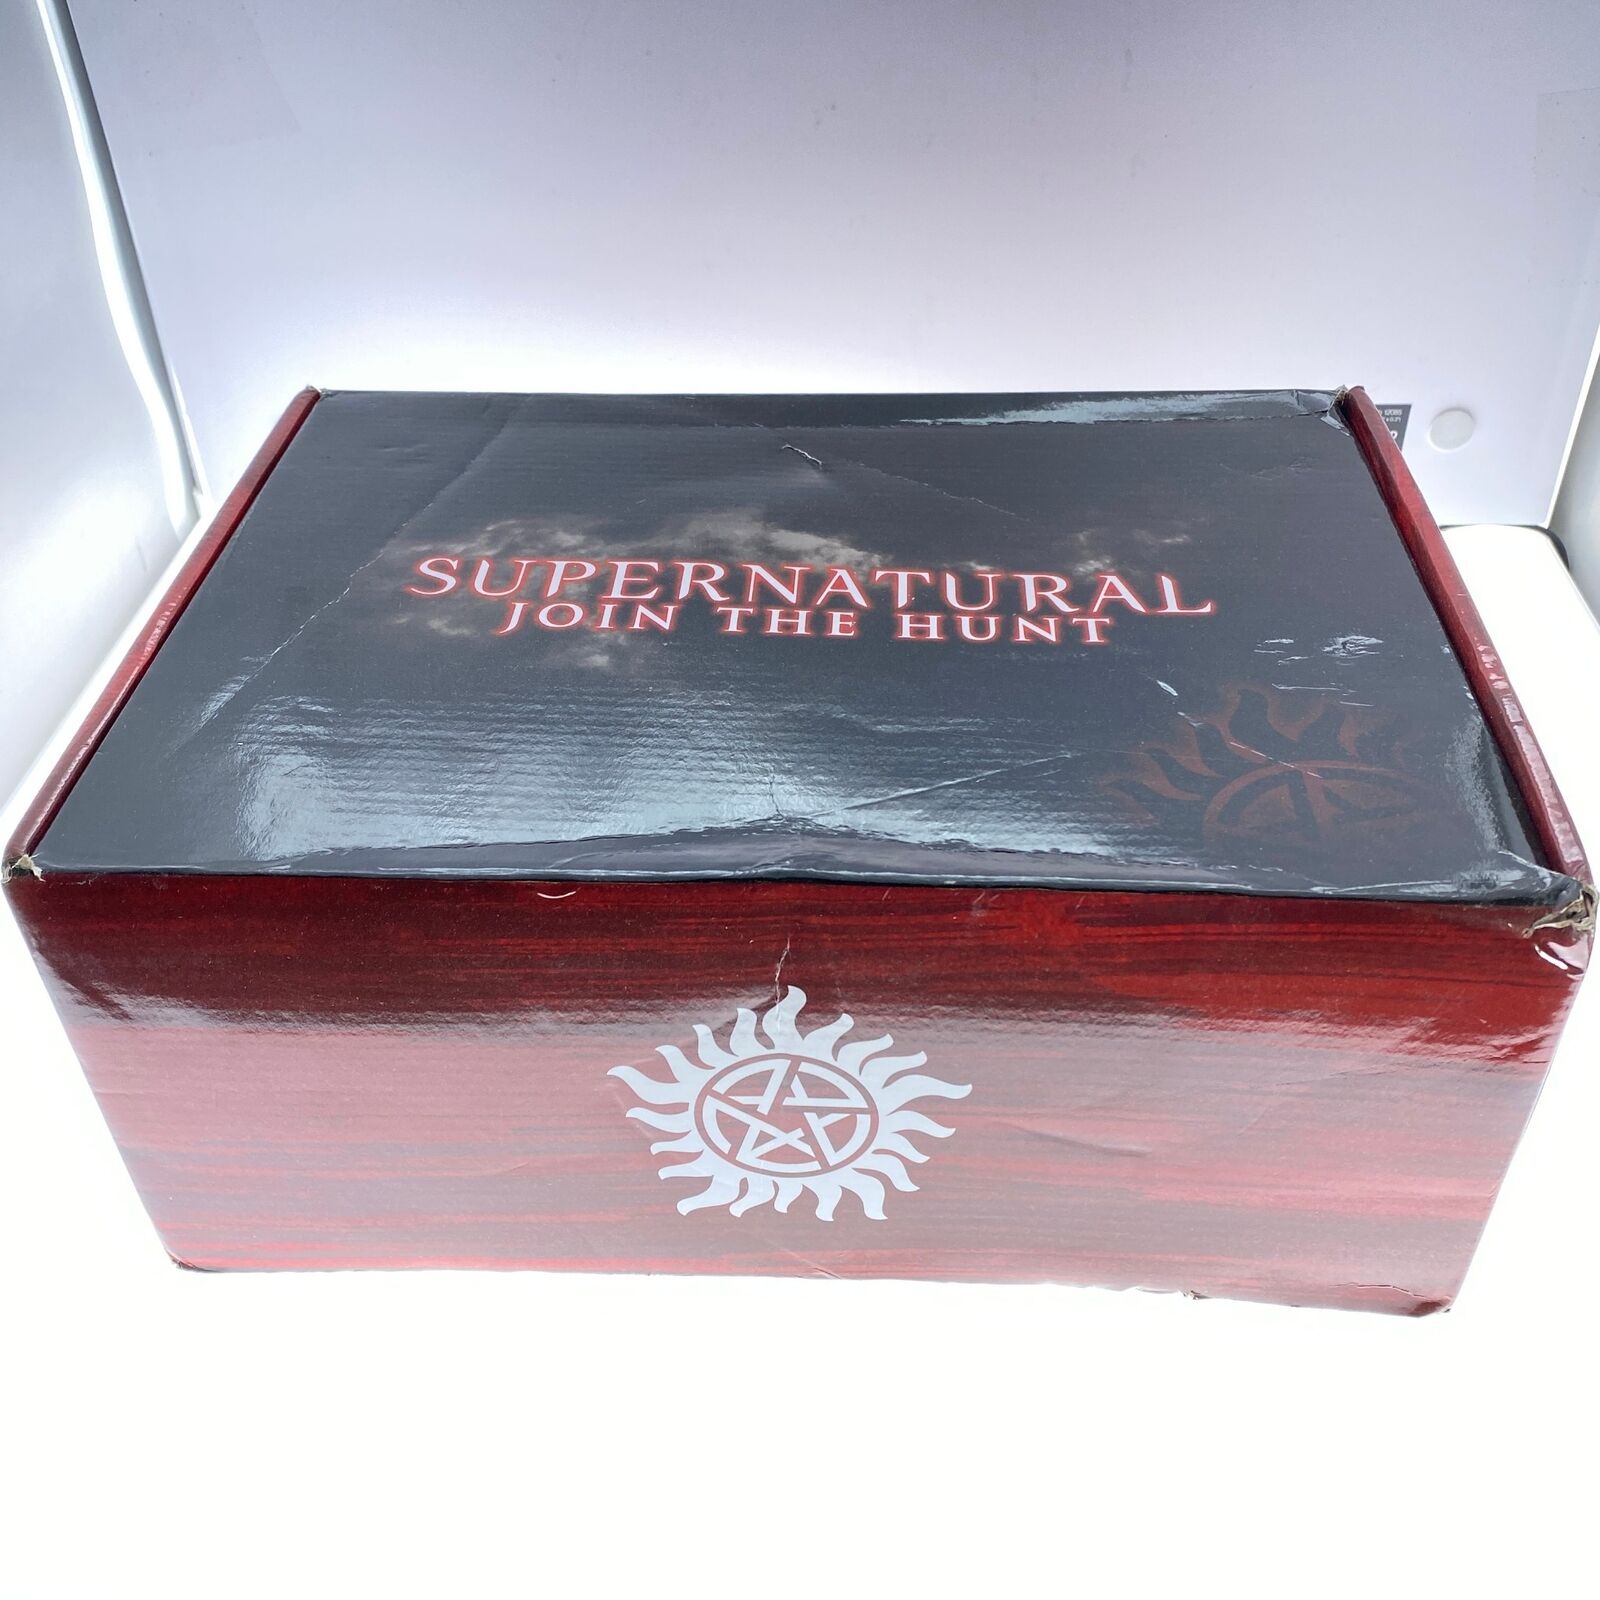 Supernatural Join the Hunt Box Size M 